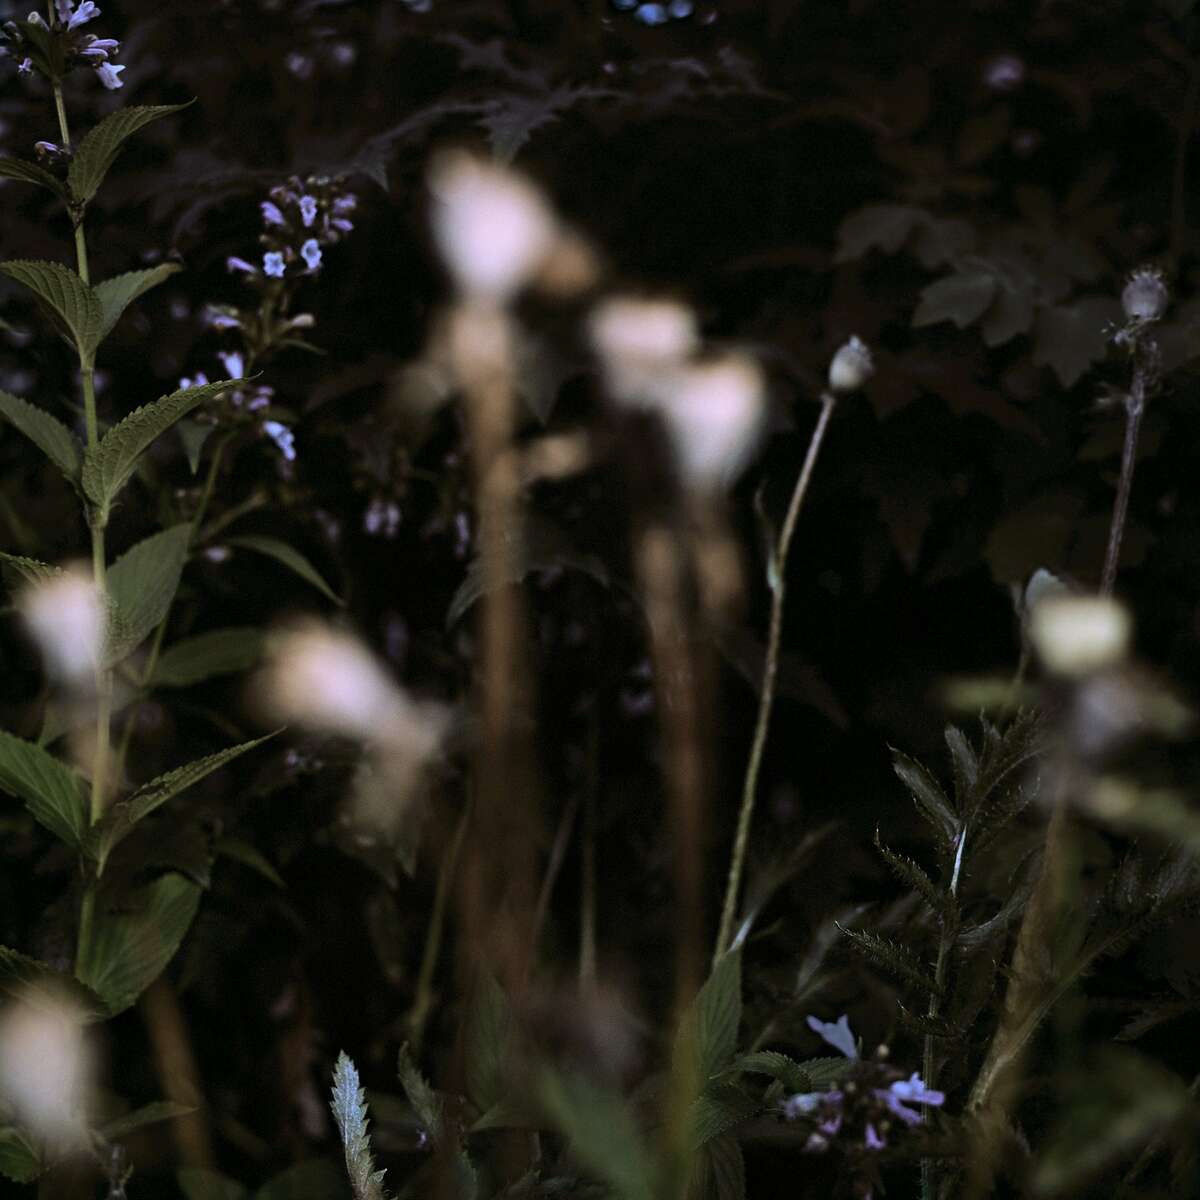 Amanda Marchand, "To Soften the Edges," 2012/15. Archival pigment print. 30" x 30" (edition of 5).